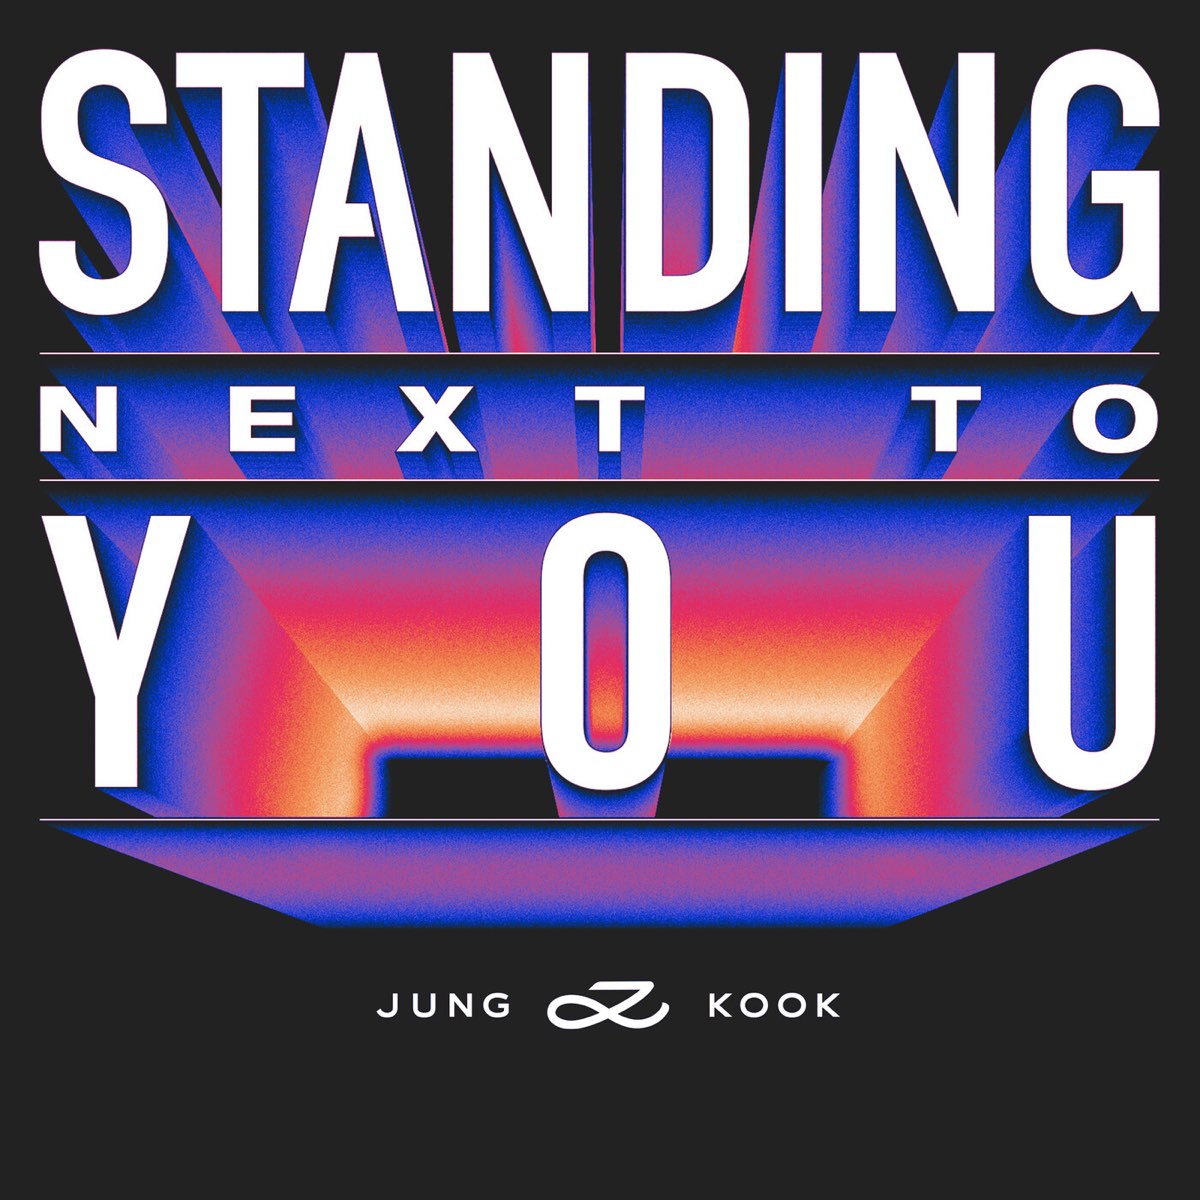 ‎Standing Next to You (The Remixes) - Album by Jung Kook - Apple Music